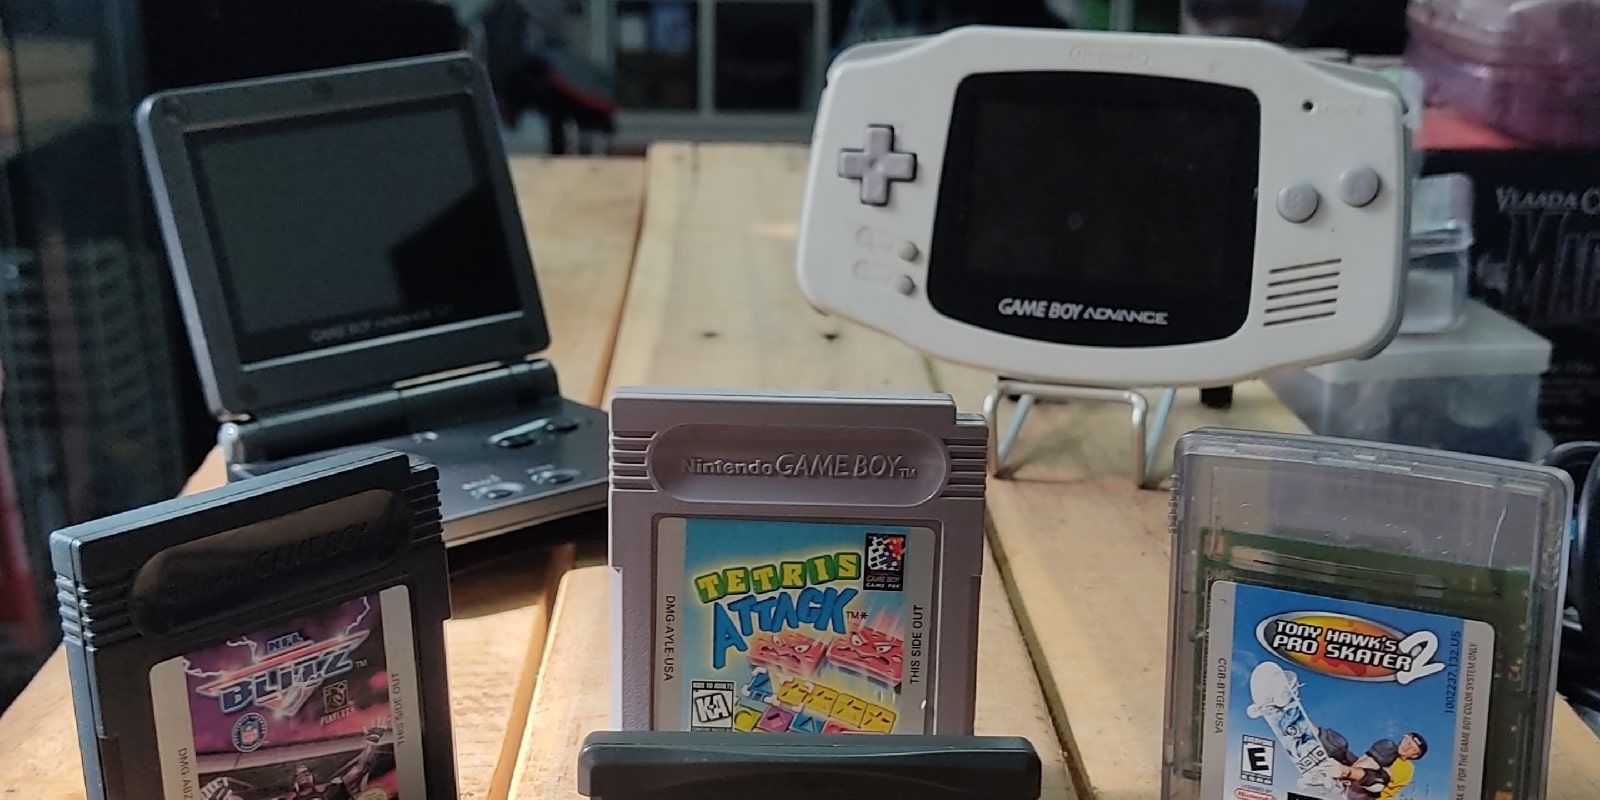 7 Things Everyone Should Know About the Game Boy Advance